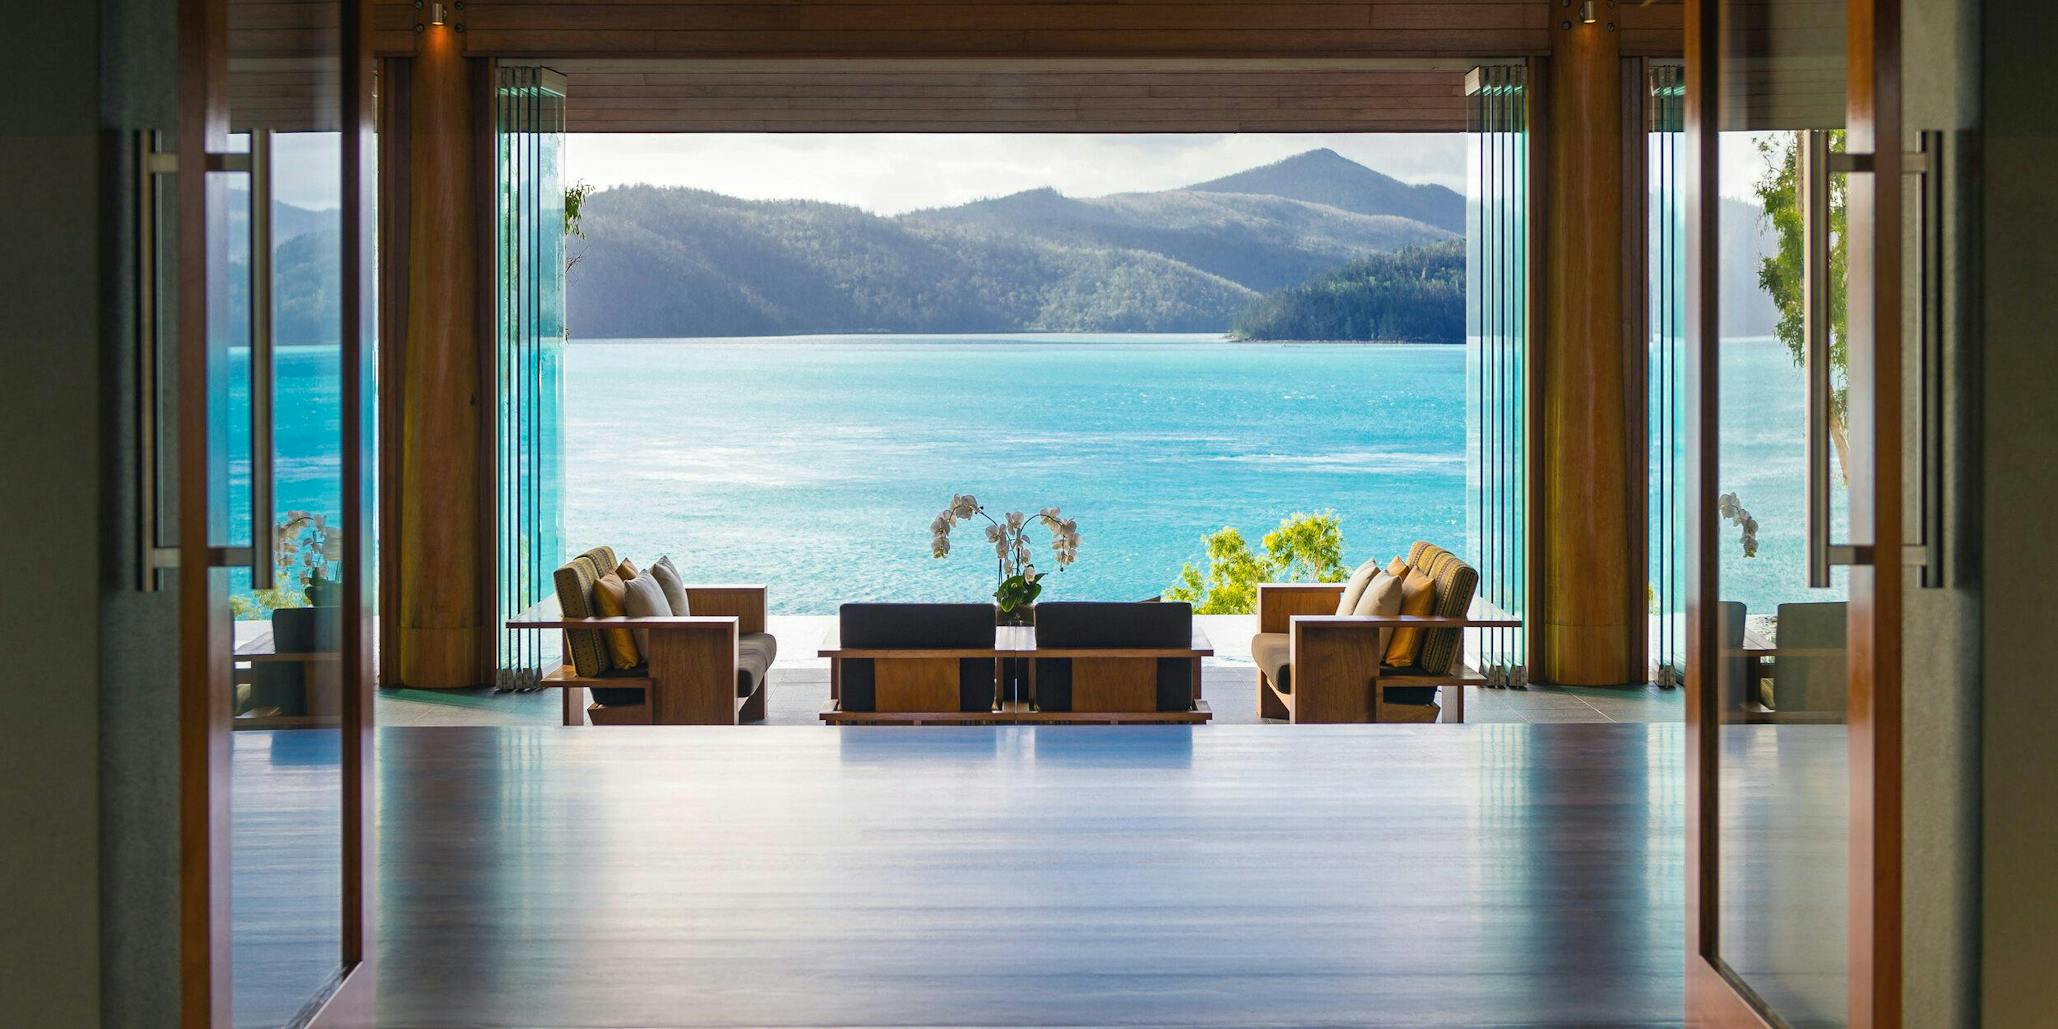 Queensland Tourism - Get 1 night complimentary when you book a 4-night retreat package  Located in the northern most tip of Hamilton Island in The Whitsundays, Queensland, qualia is a luxurious resort tucked into tropical bushland with the Great Bar…